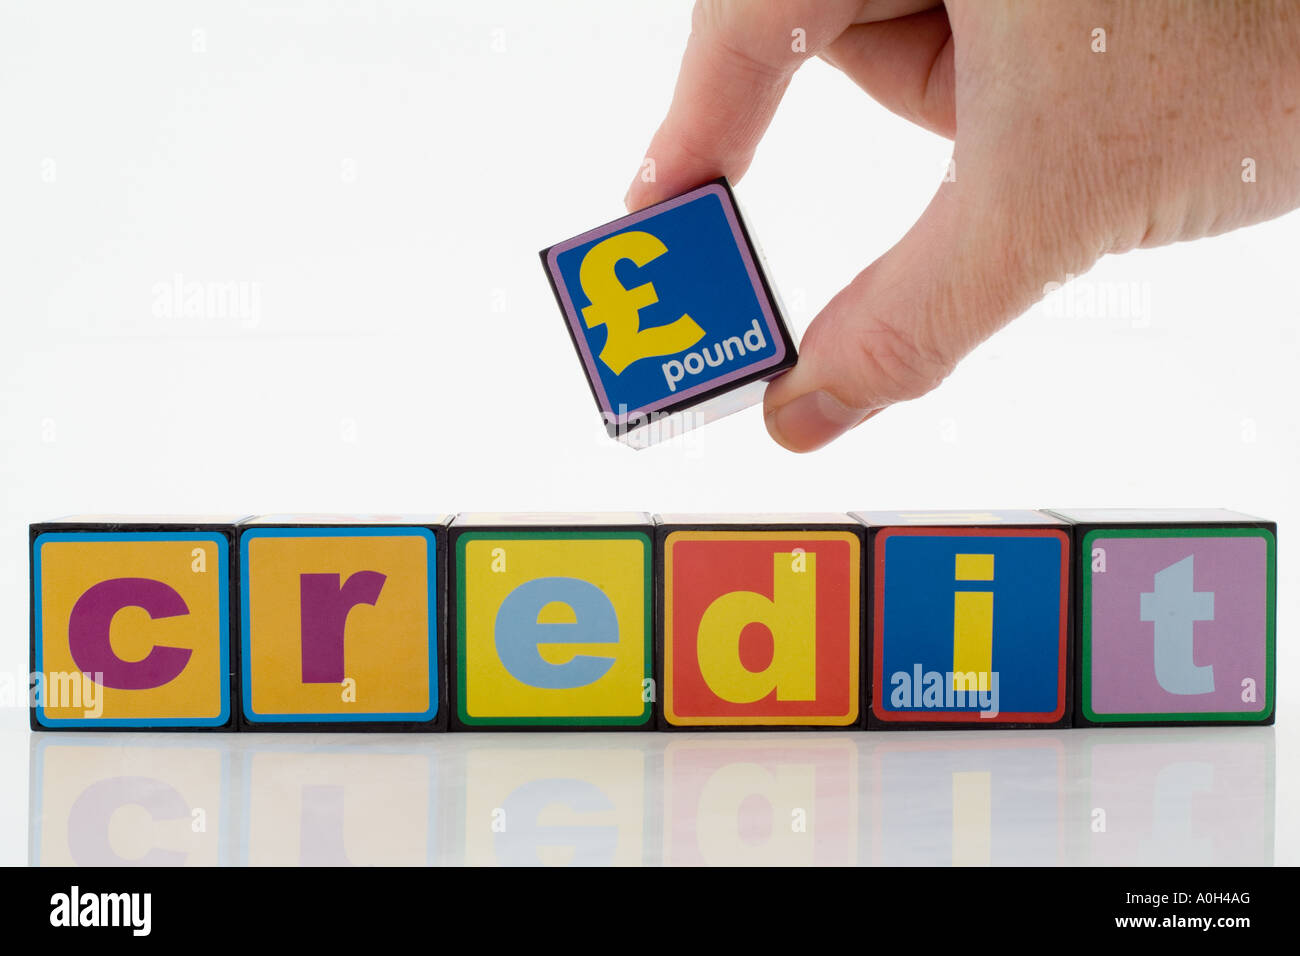 toy building blocks with the word credit and the pound sterling symbol Stock Photo